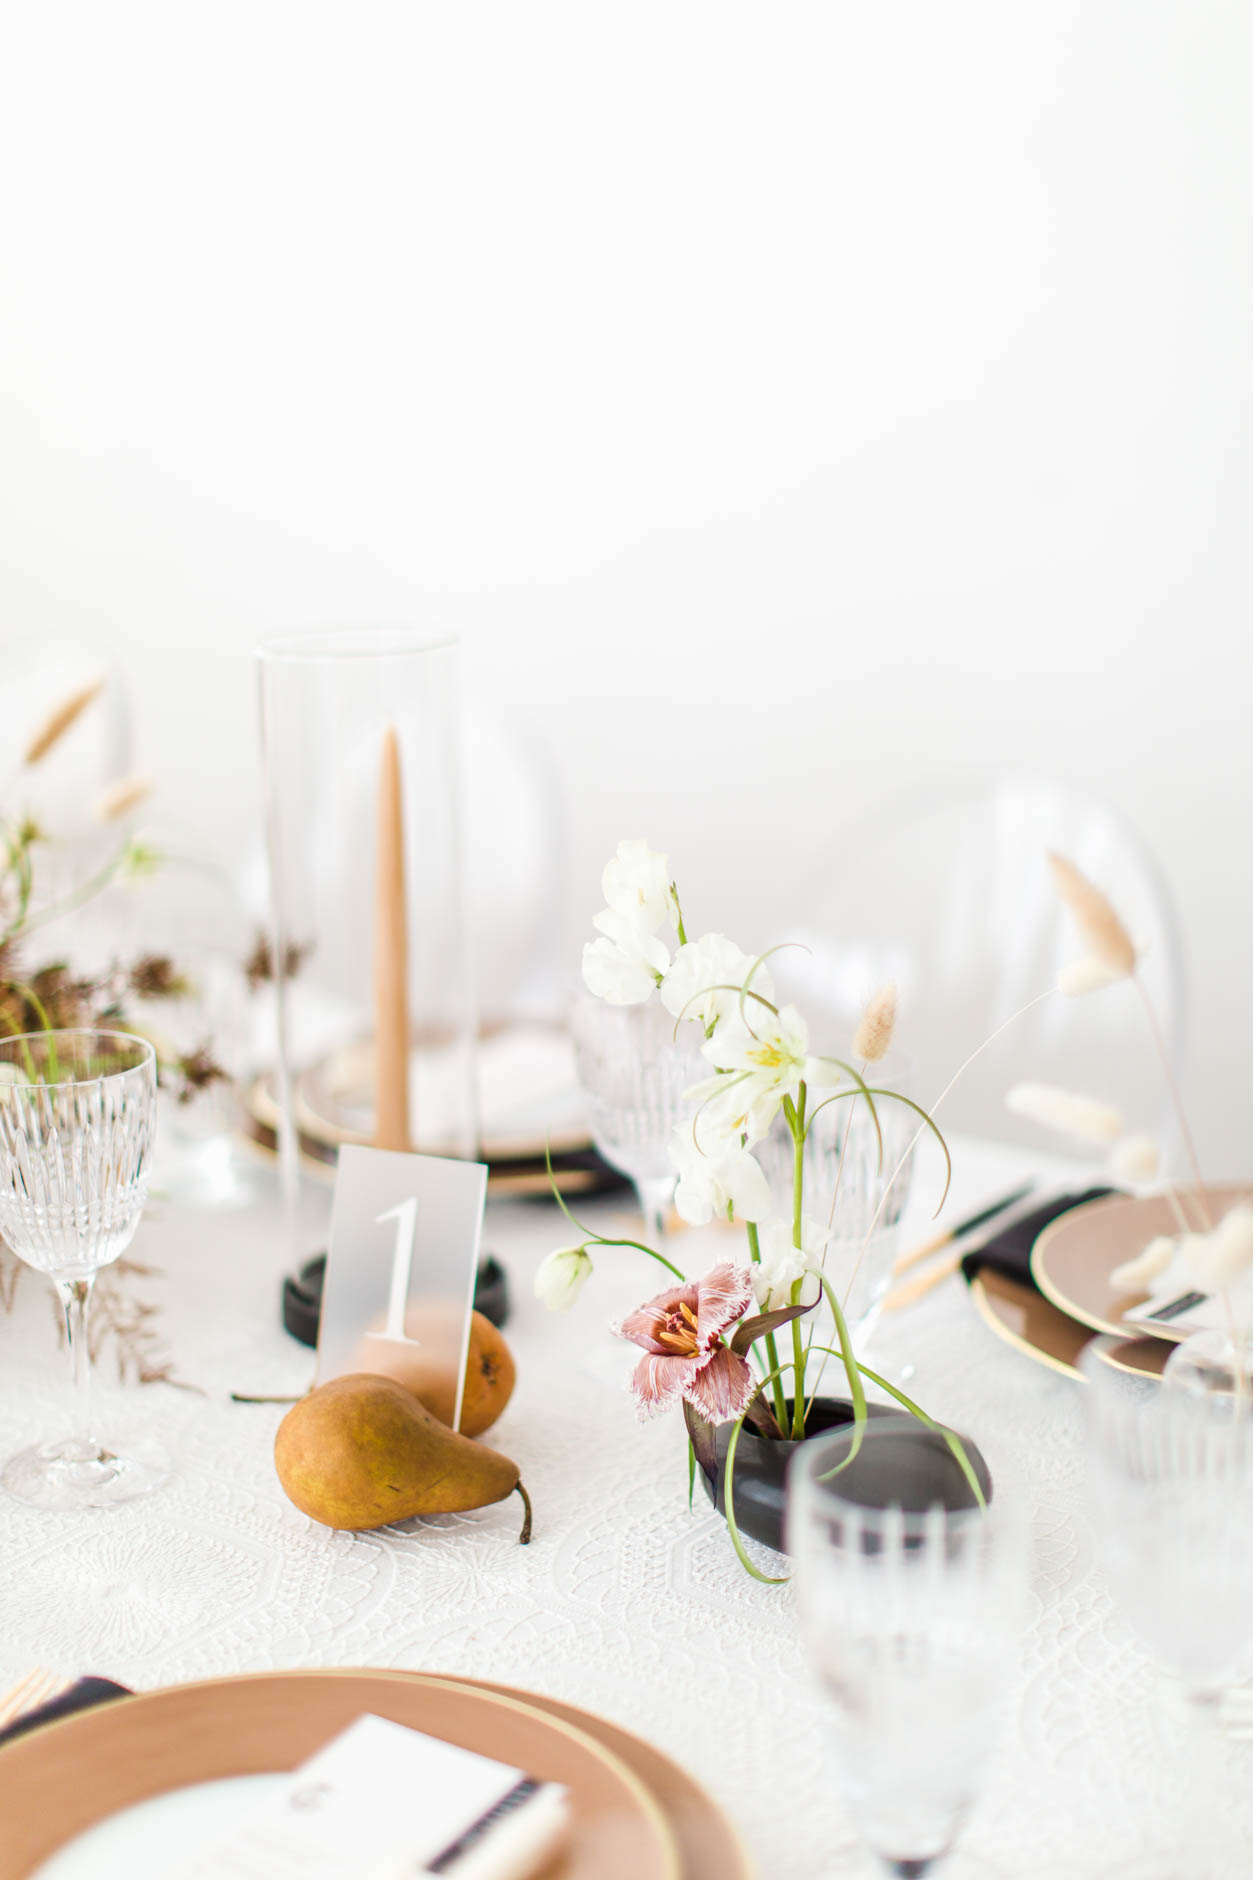 Tablescape with frosted table number and pears for modern warehouse wedding inspiration